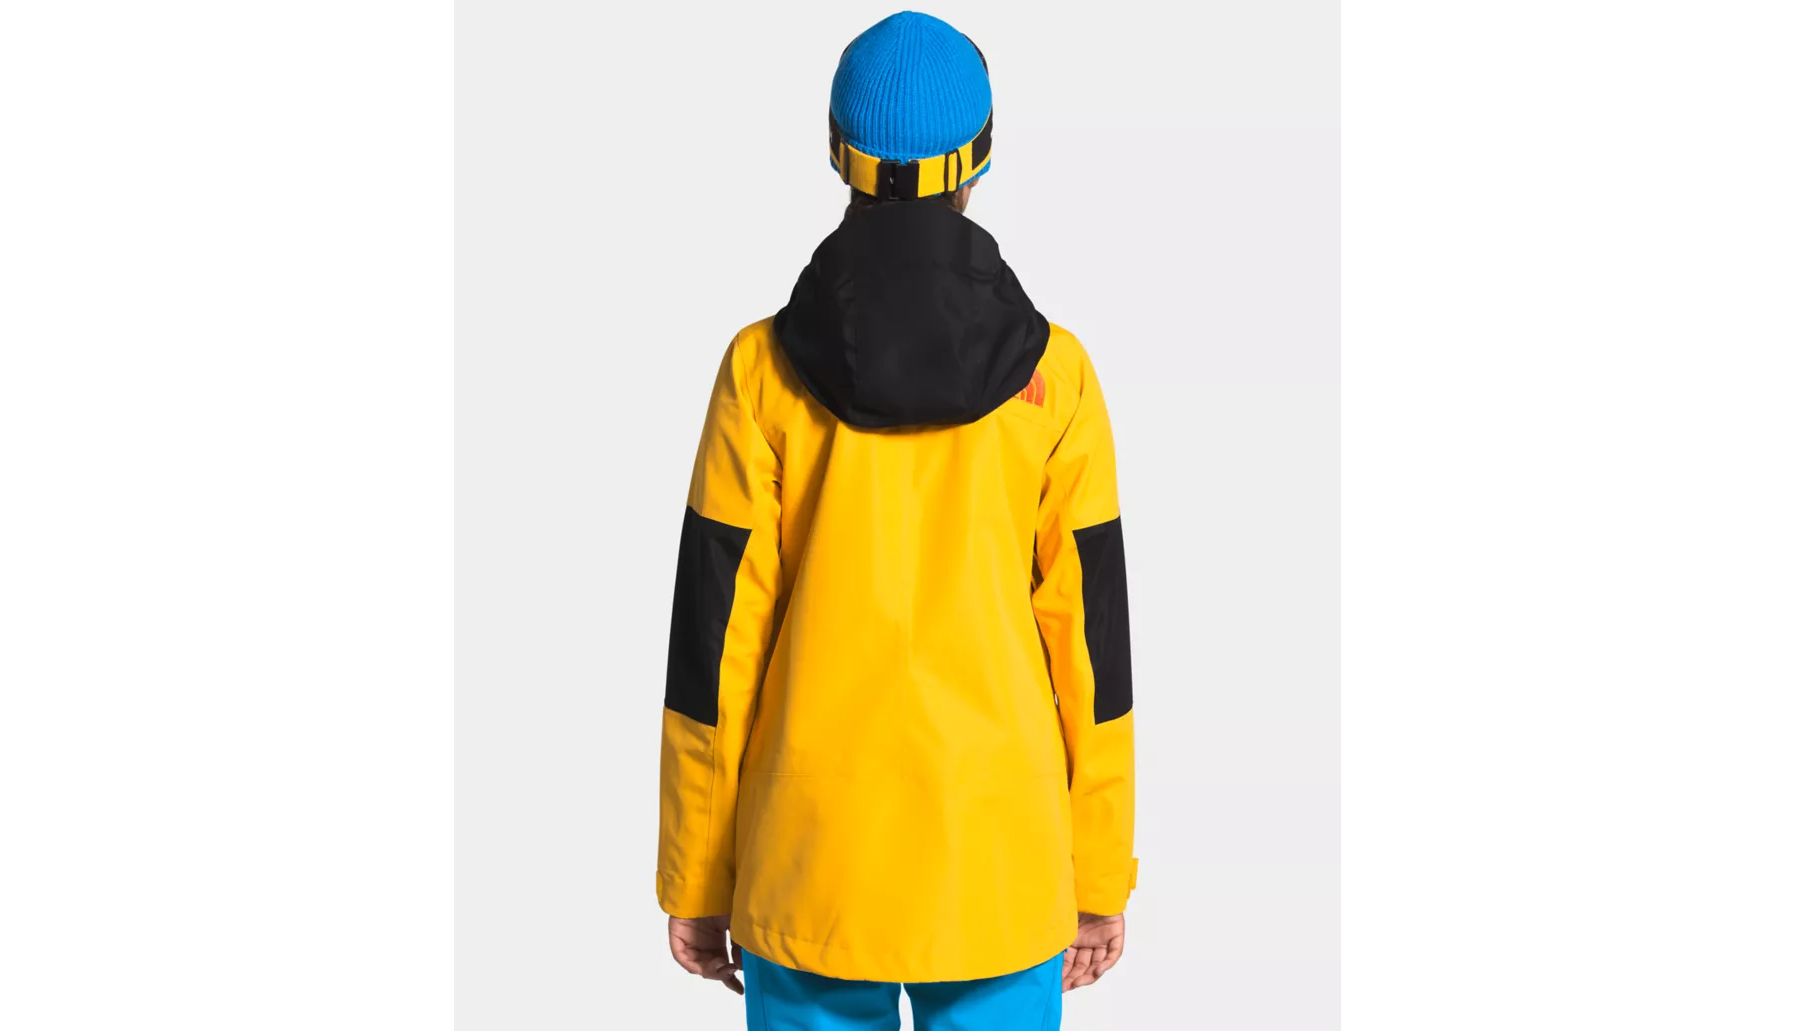 The North Face The North Face W's Team Kit Jacket